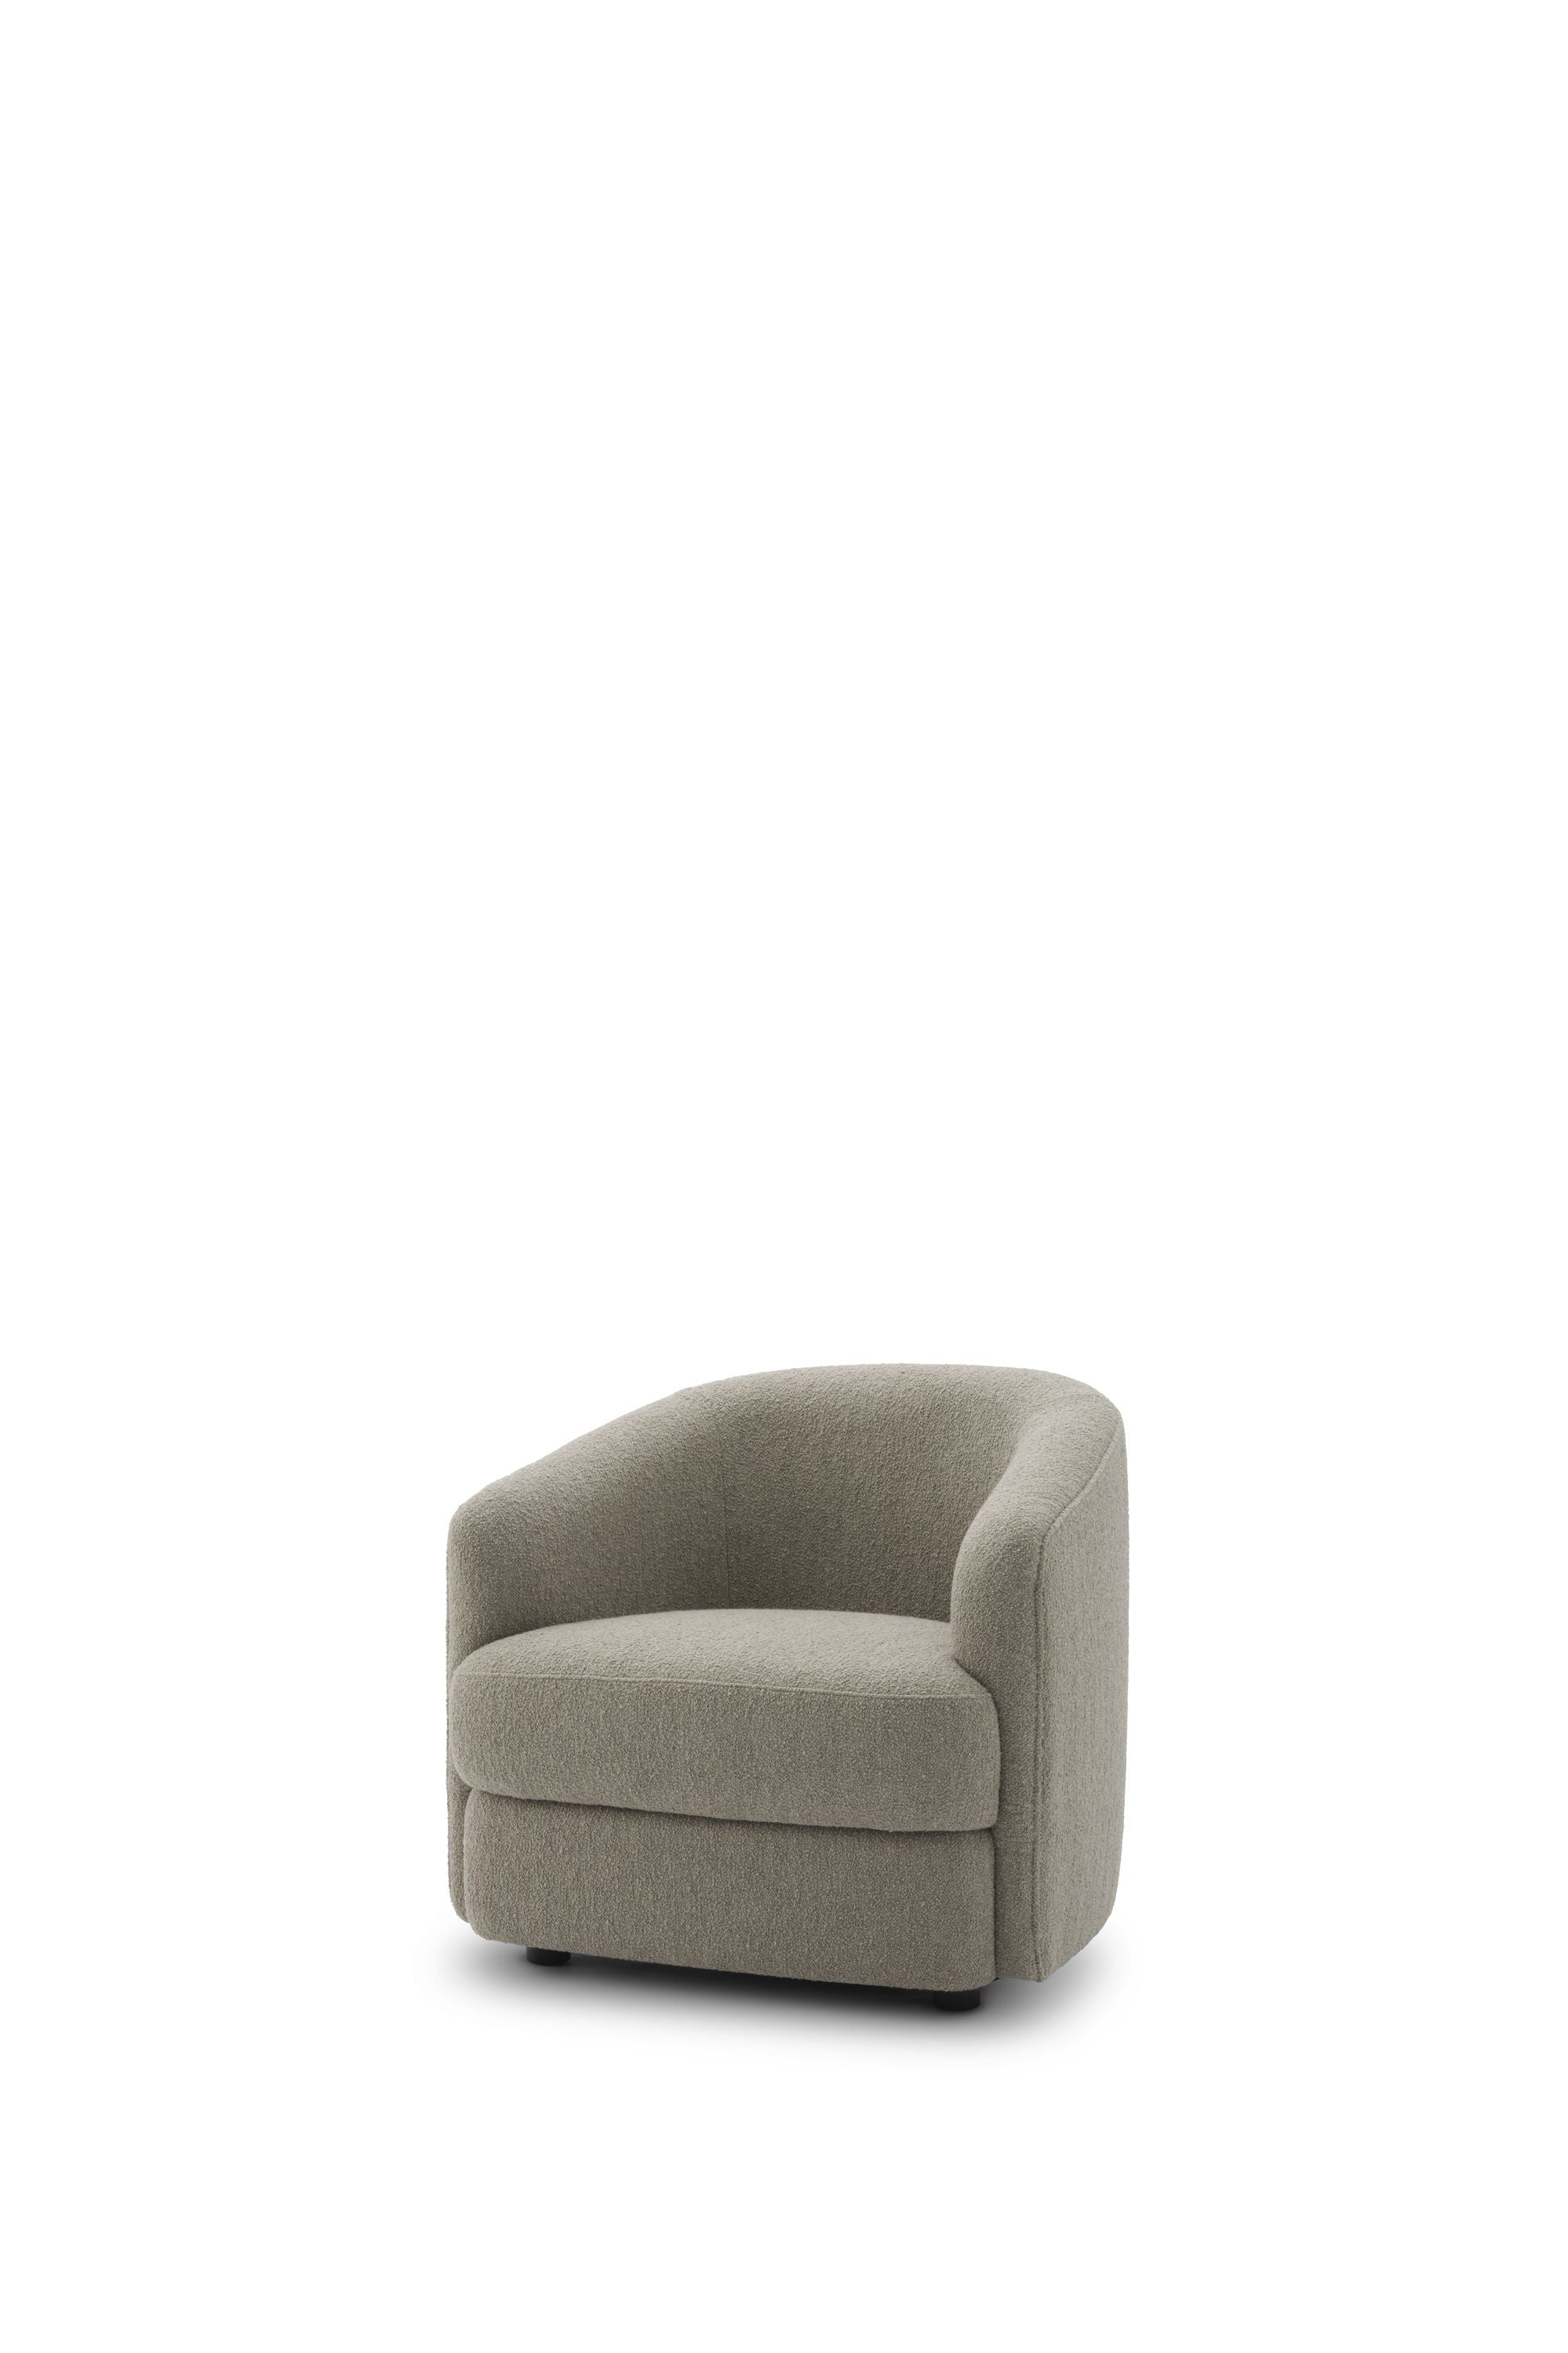 New Works Covent Lounge Chair, Hemp